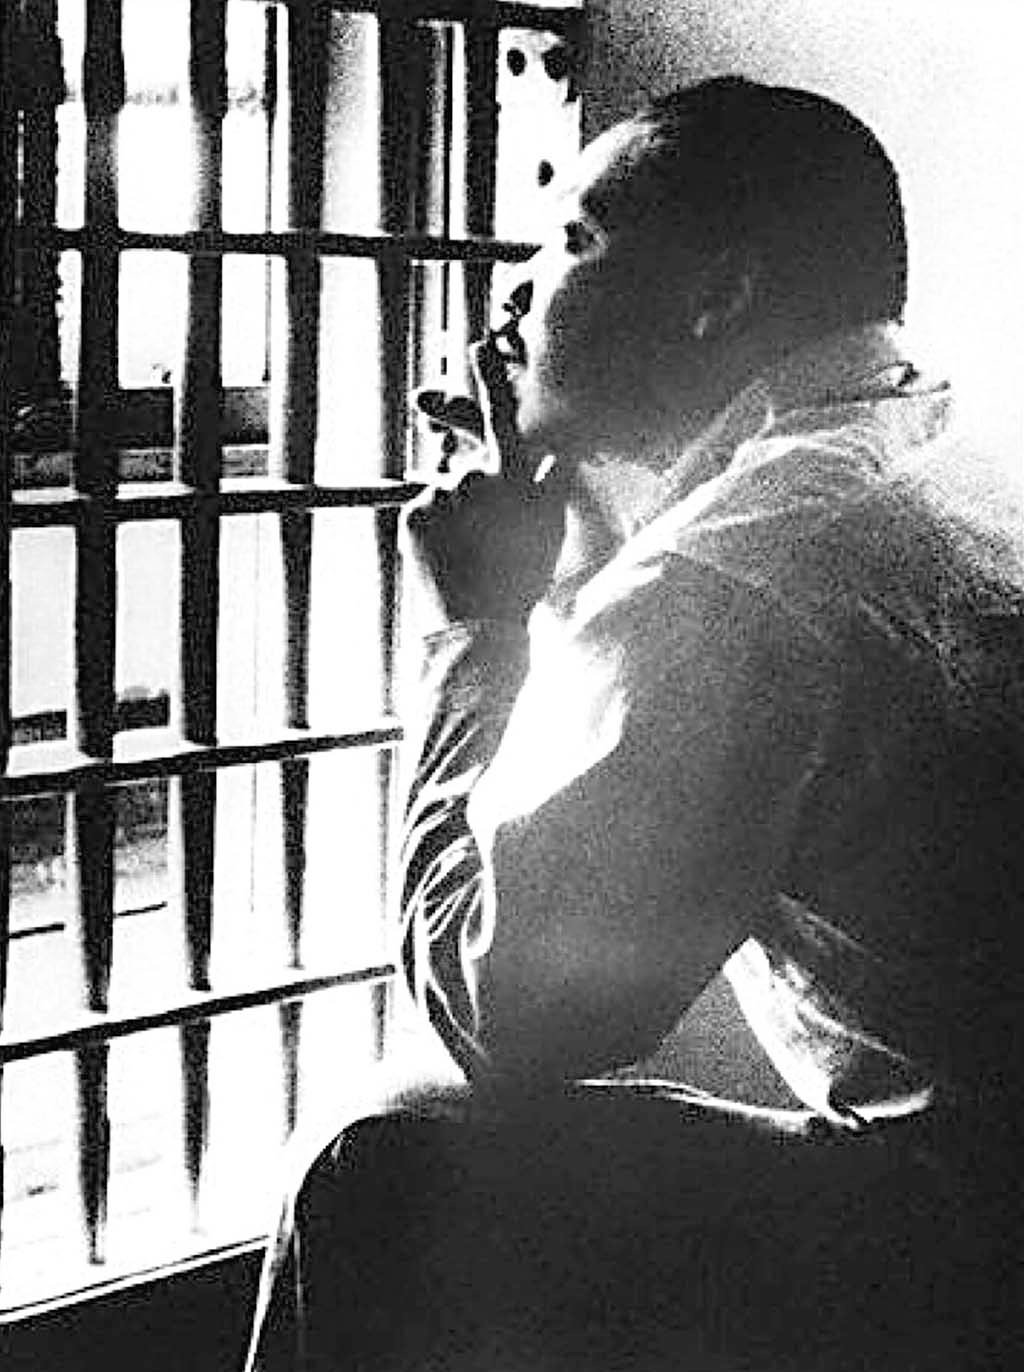 Martin Luther King Jr. in a photograph taken at Jefferson County Jail in Birmingham, Alabama.